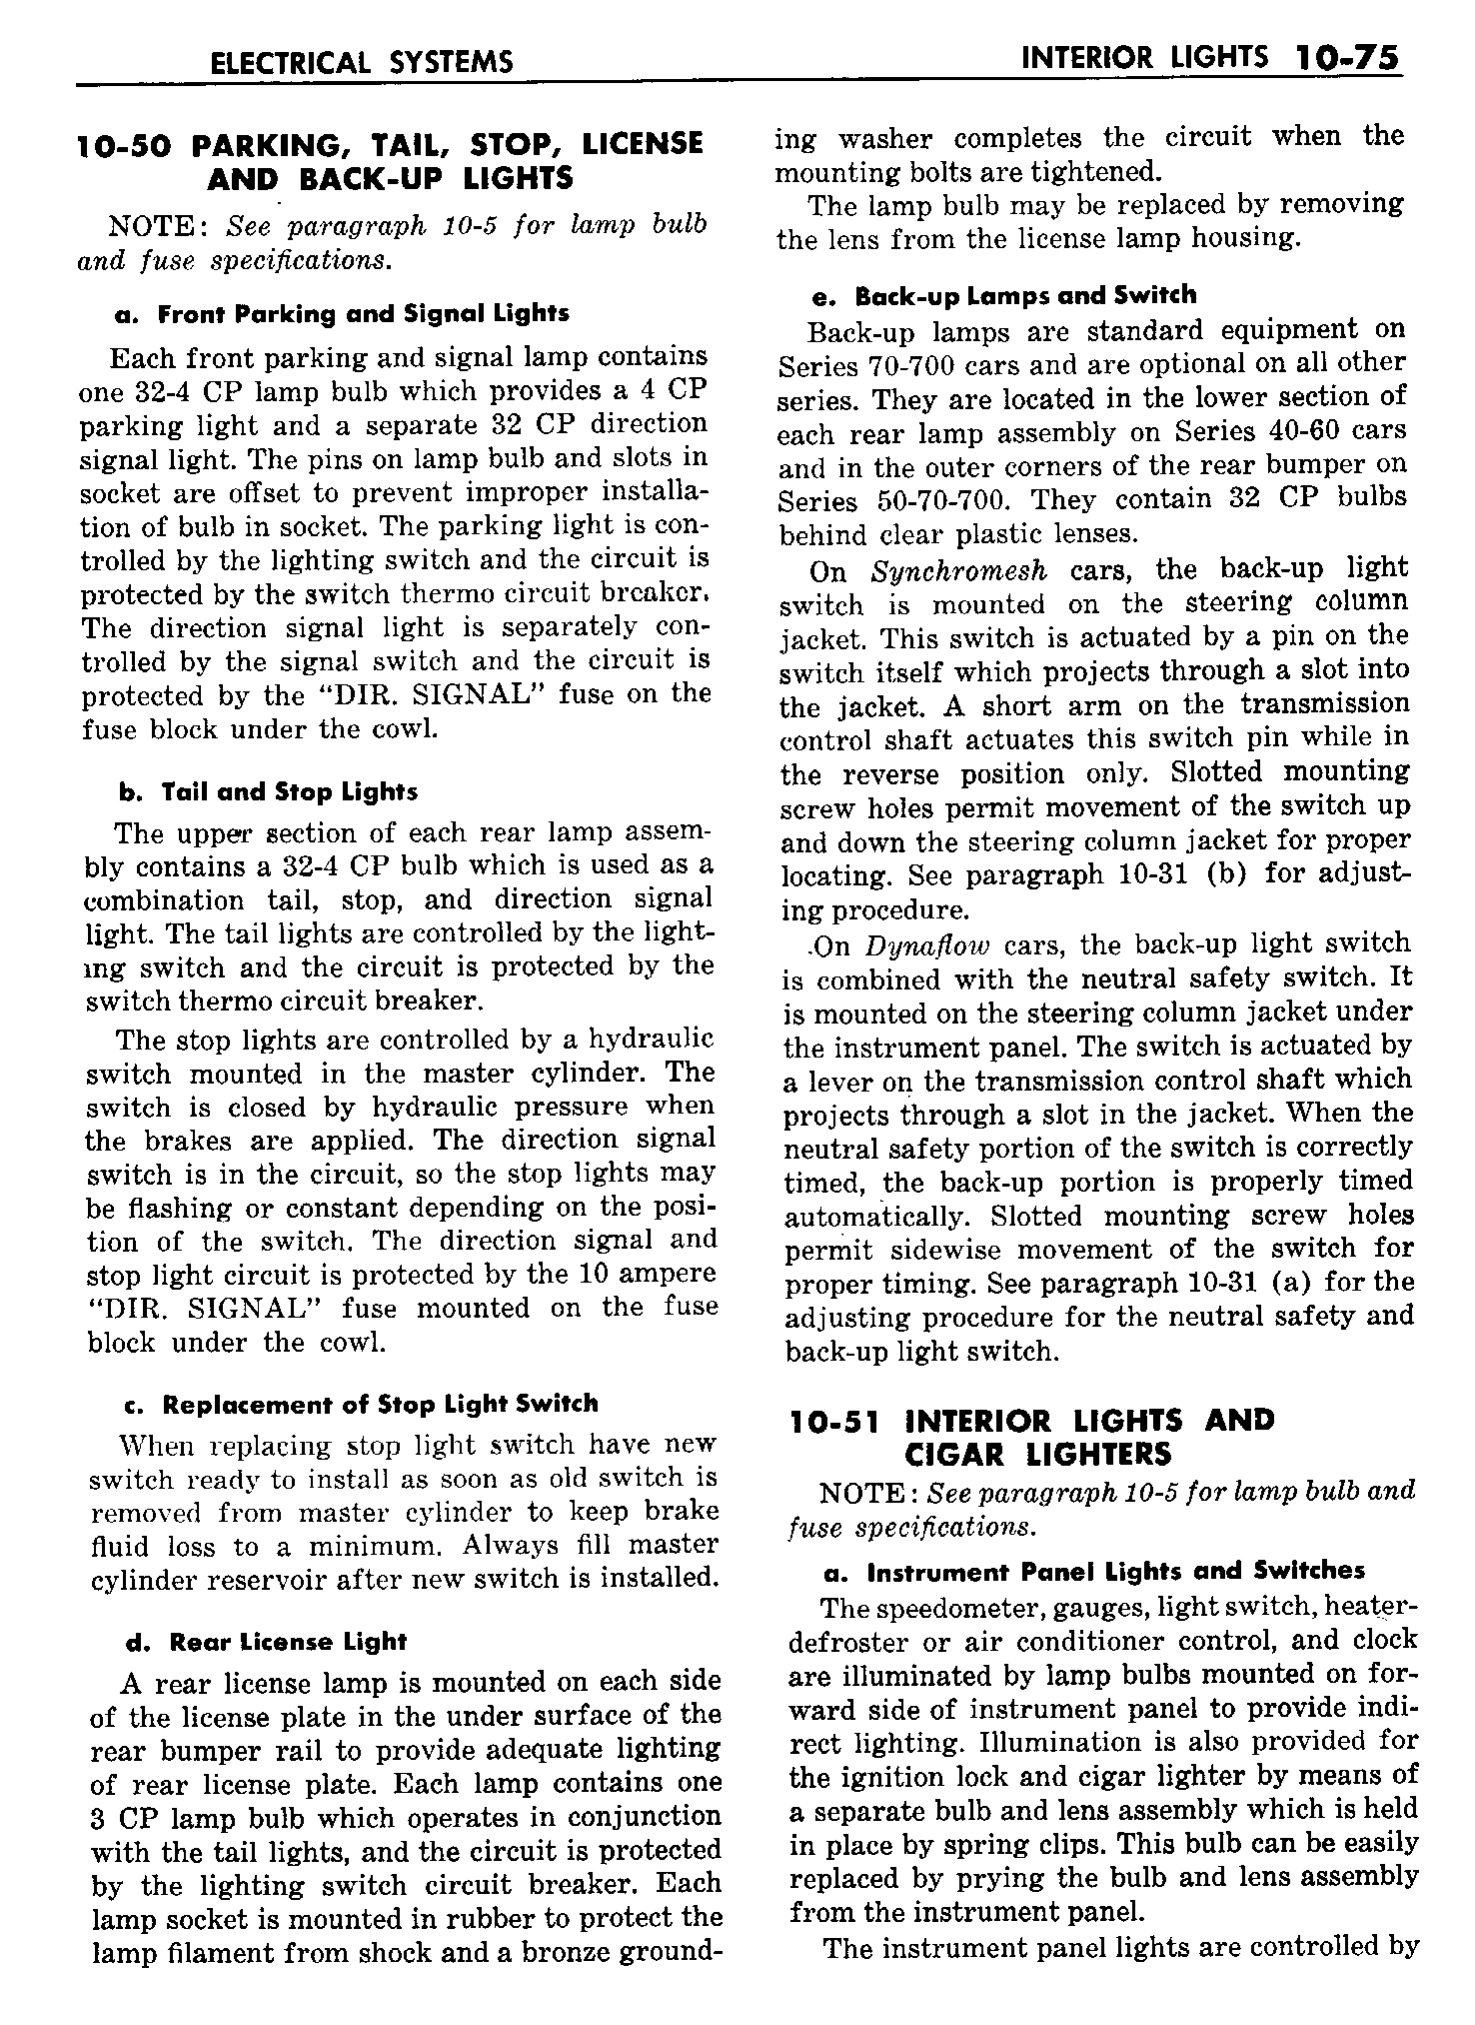 n_11 1958 Buick Shop Manual - Electrical Systems_75.jpg